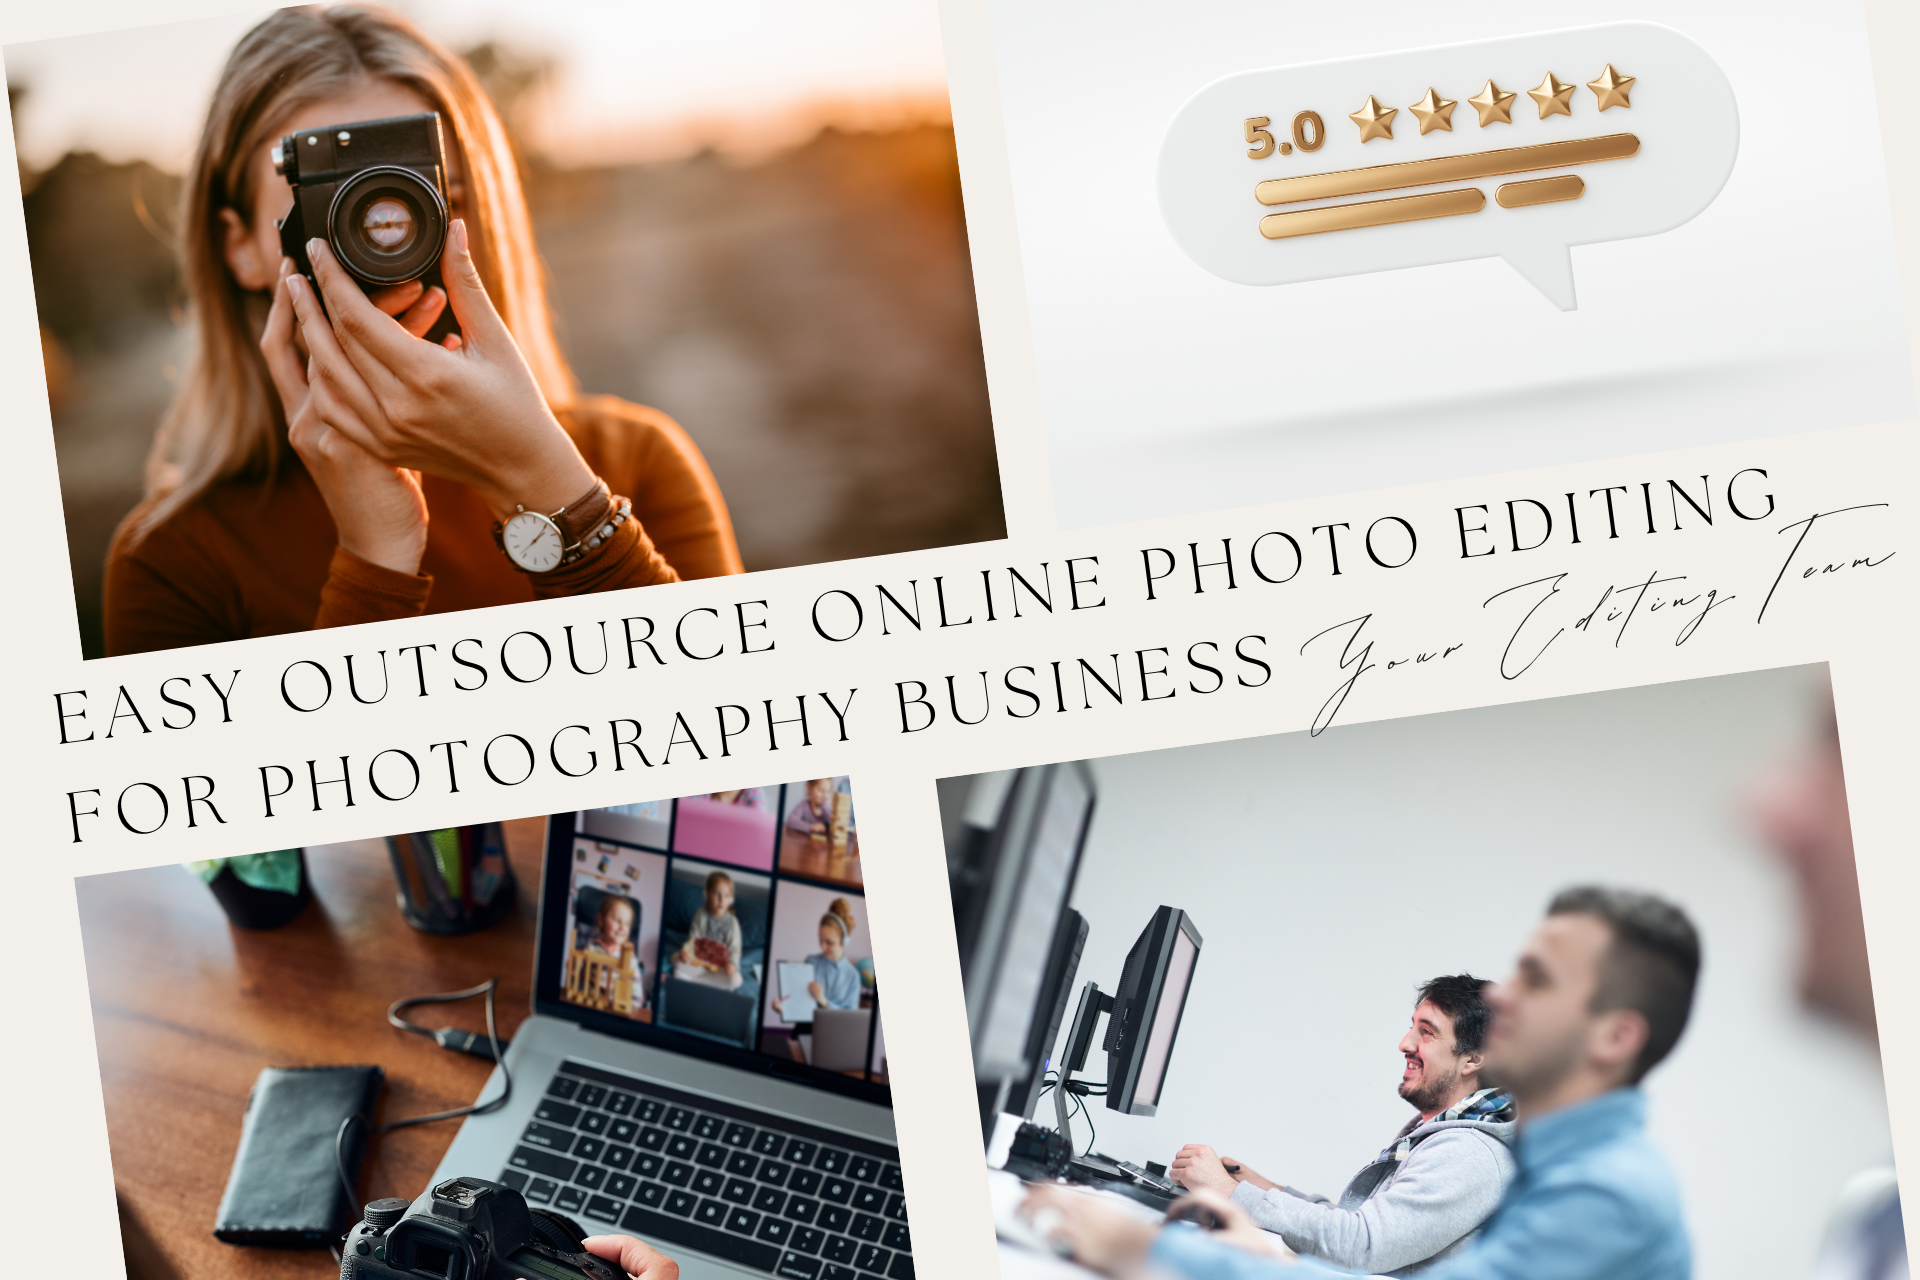 Easy Outsource online photo editing for Photography Business